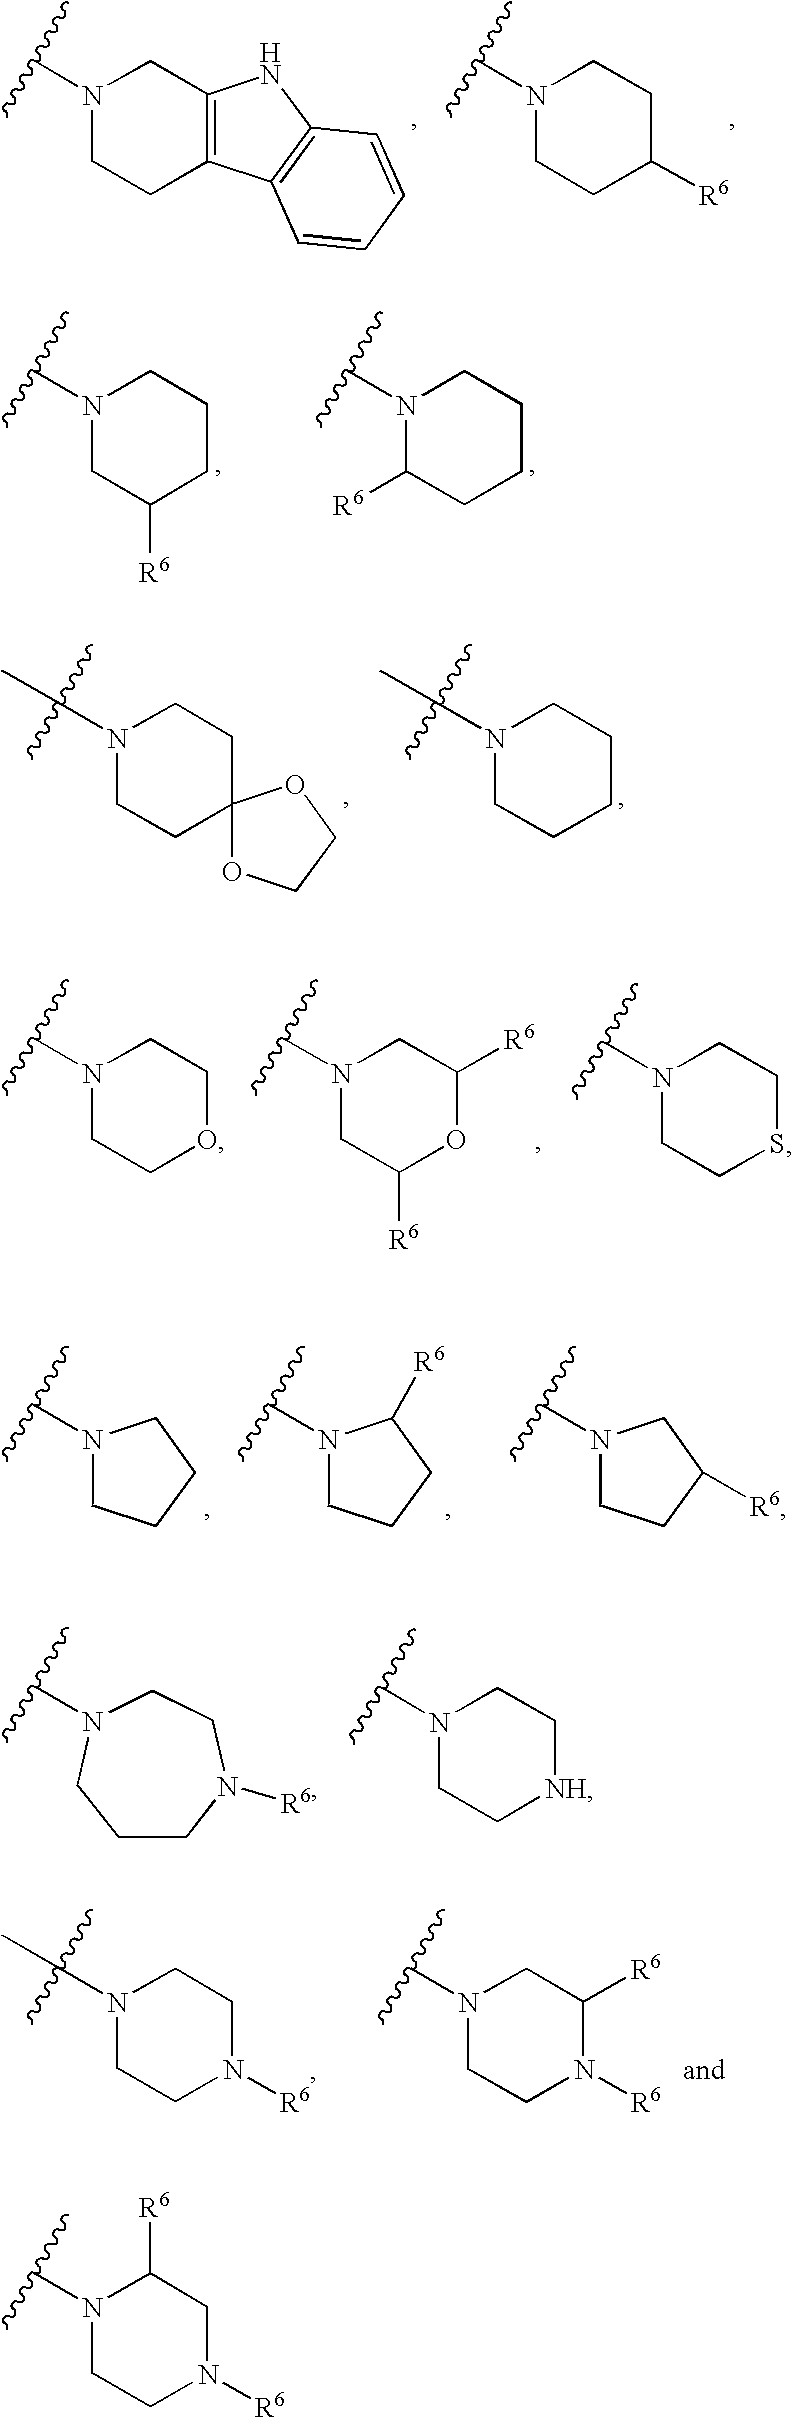 1,3-disubstituted 4-methyl-1H-pyrrole-2-carboxamides and their use in medicaments